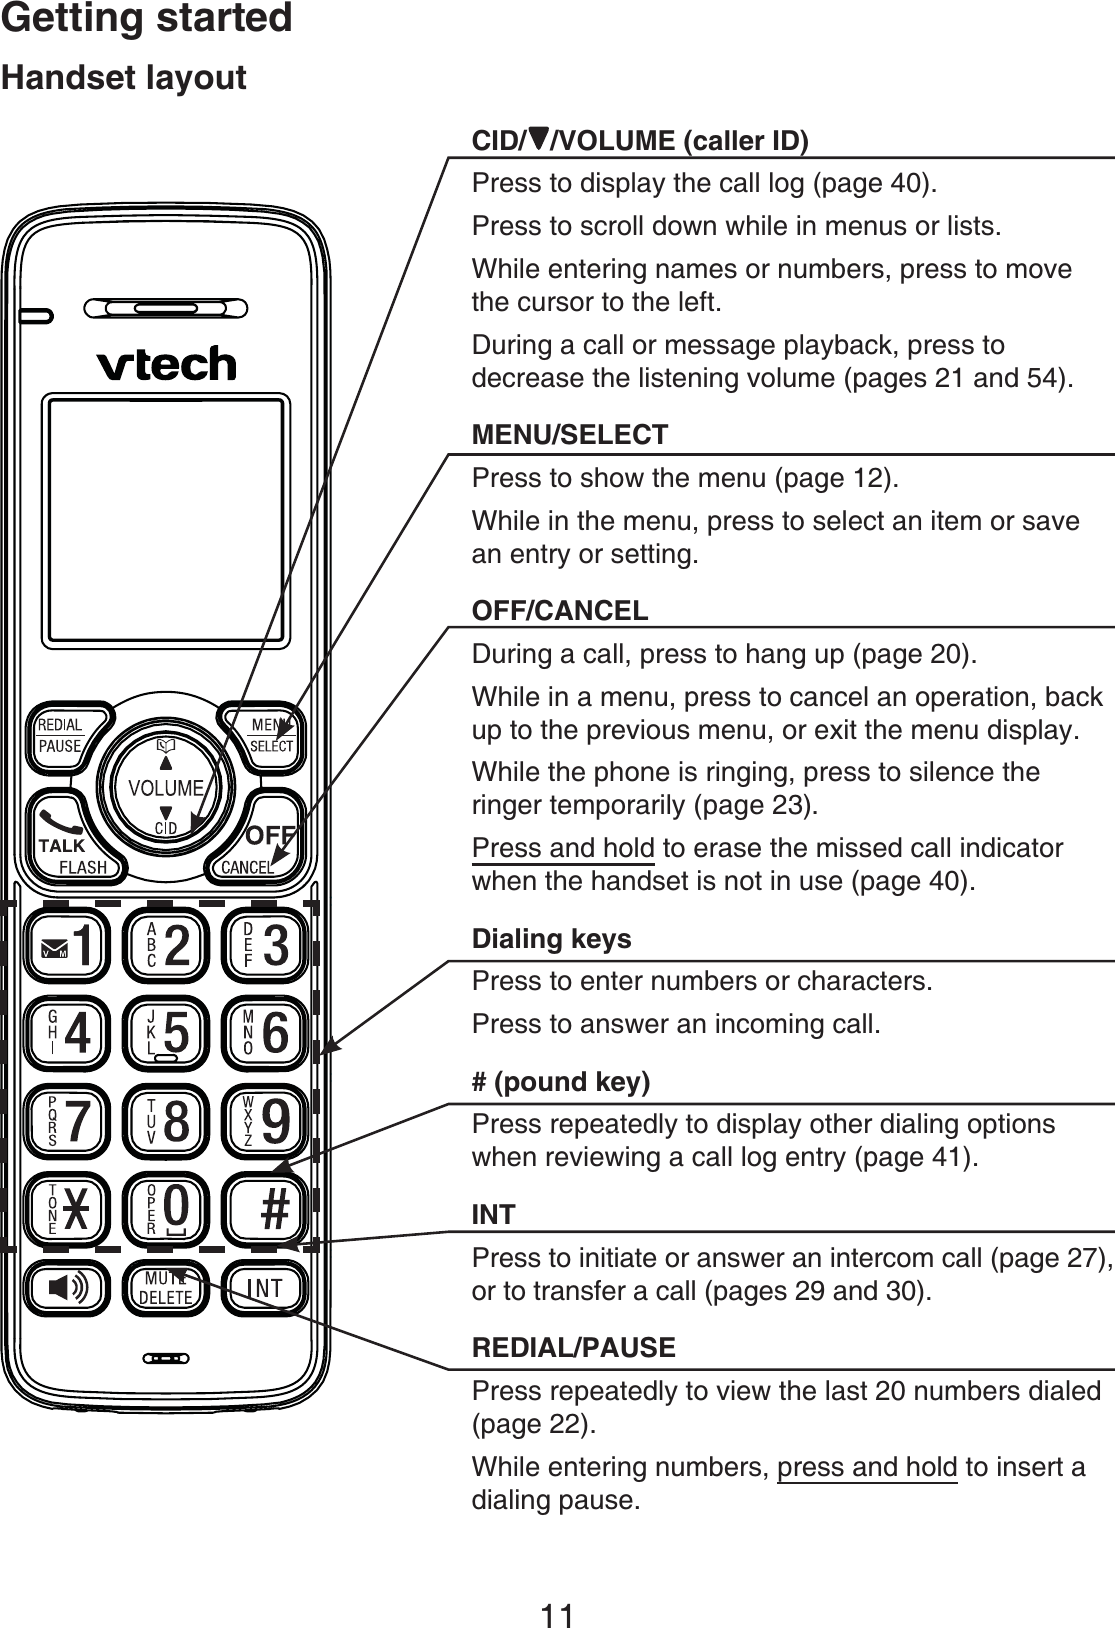 11Getting startedHandset layoutCID/ /VOLUME (caller ID)Press to display the call log (page 40).Press to scroll down while in menus or lists.While entering names or numbers, press to move the cursor to the left.During a call or message playback, press to decrease the listening volume (pages 21 and 54).MENU/SELECTPress to show the menu (page 12).While in the menu, press to select an item or save an entry or setting.OFF/CANCELDuring a call, press to hang up (page 20).While in a menu, press to cancel an operation, back up to the previous menu, or exit the menu display.While the phone is ringing, press to silence the ringer temporarily (page 23).Press and hold to erase the missed call indicator when the handset is not in use (page 40).Dialing keysPress to enter numbers or characters.Press to answer an incoming call.# (pound key)Press repeatedly to display other dialing options when reviewing a call log entry (page 41).INTPress to initiate or answer an intercom call (page 27), or to transfer a call (pages 29 and 30).REDIAL/PAUSEPress repeatedly to view the last 20 numbers dialed(page 22).While entering numbers, press and hold to insert a dialing pause.